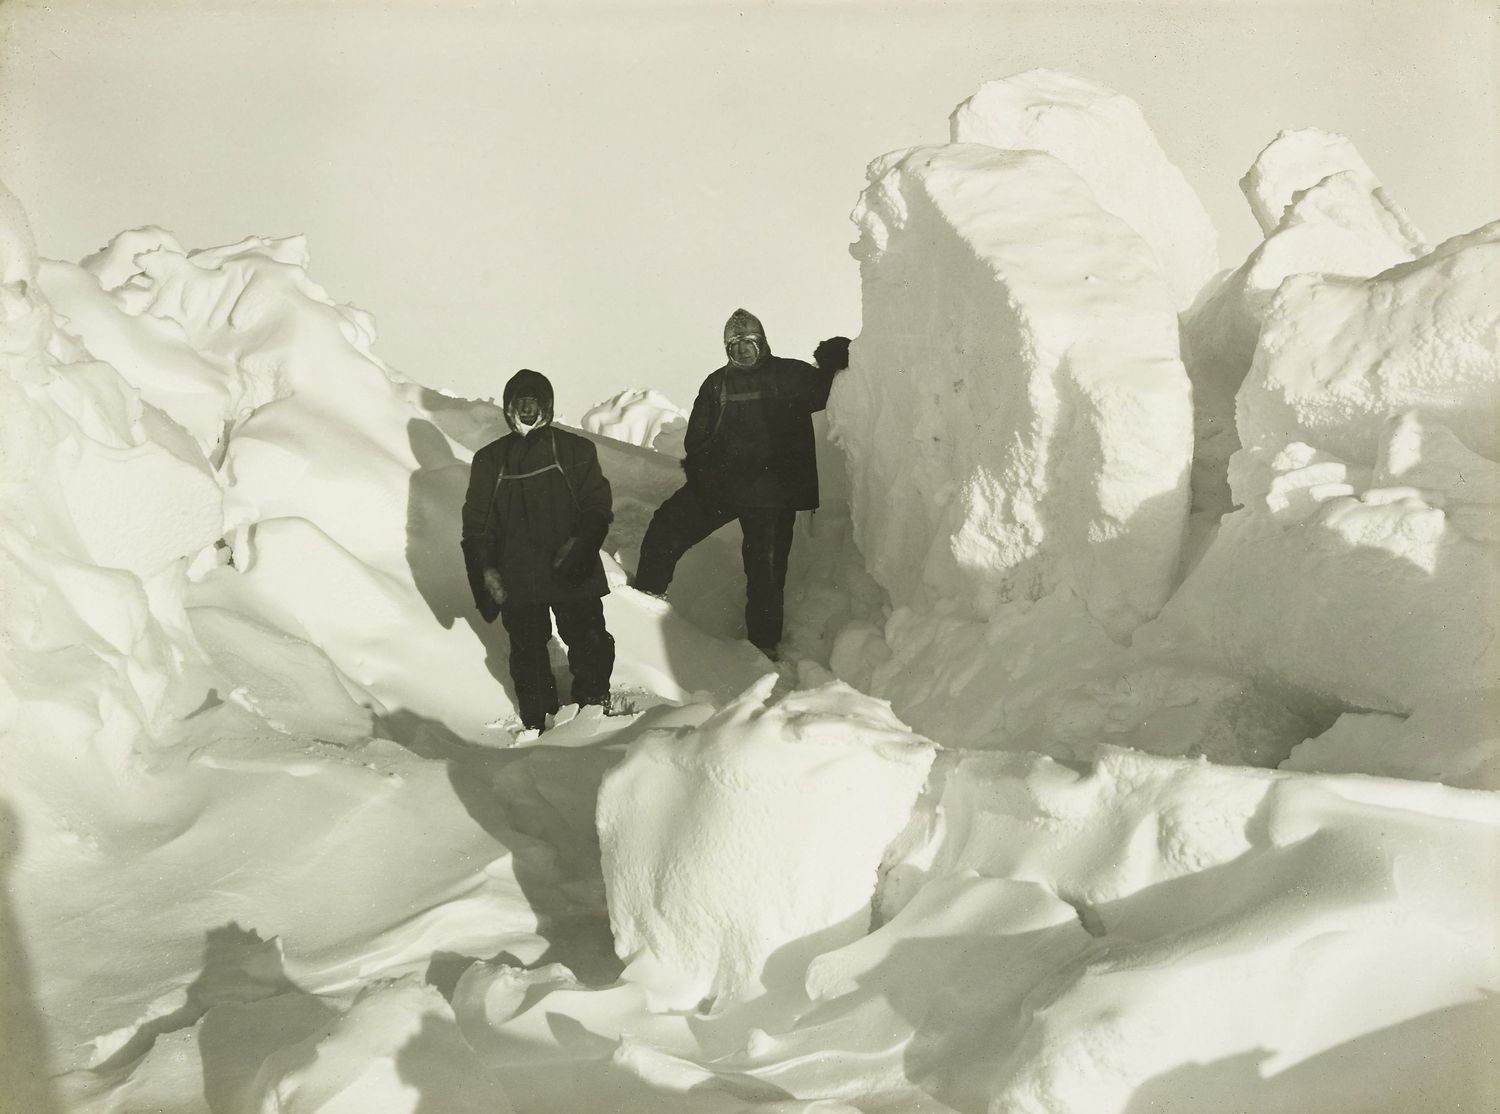 Frank Wild and Ernest Shackleton in the dense snow of Antarctica, on the Endurance mission. Photo: Frank Hurley / Wiki Commons.